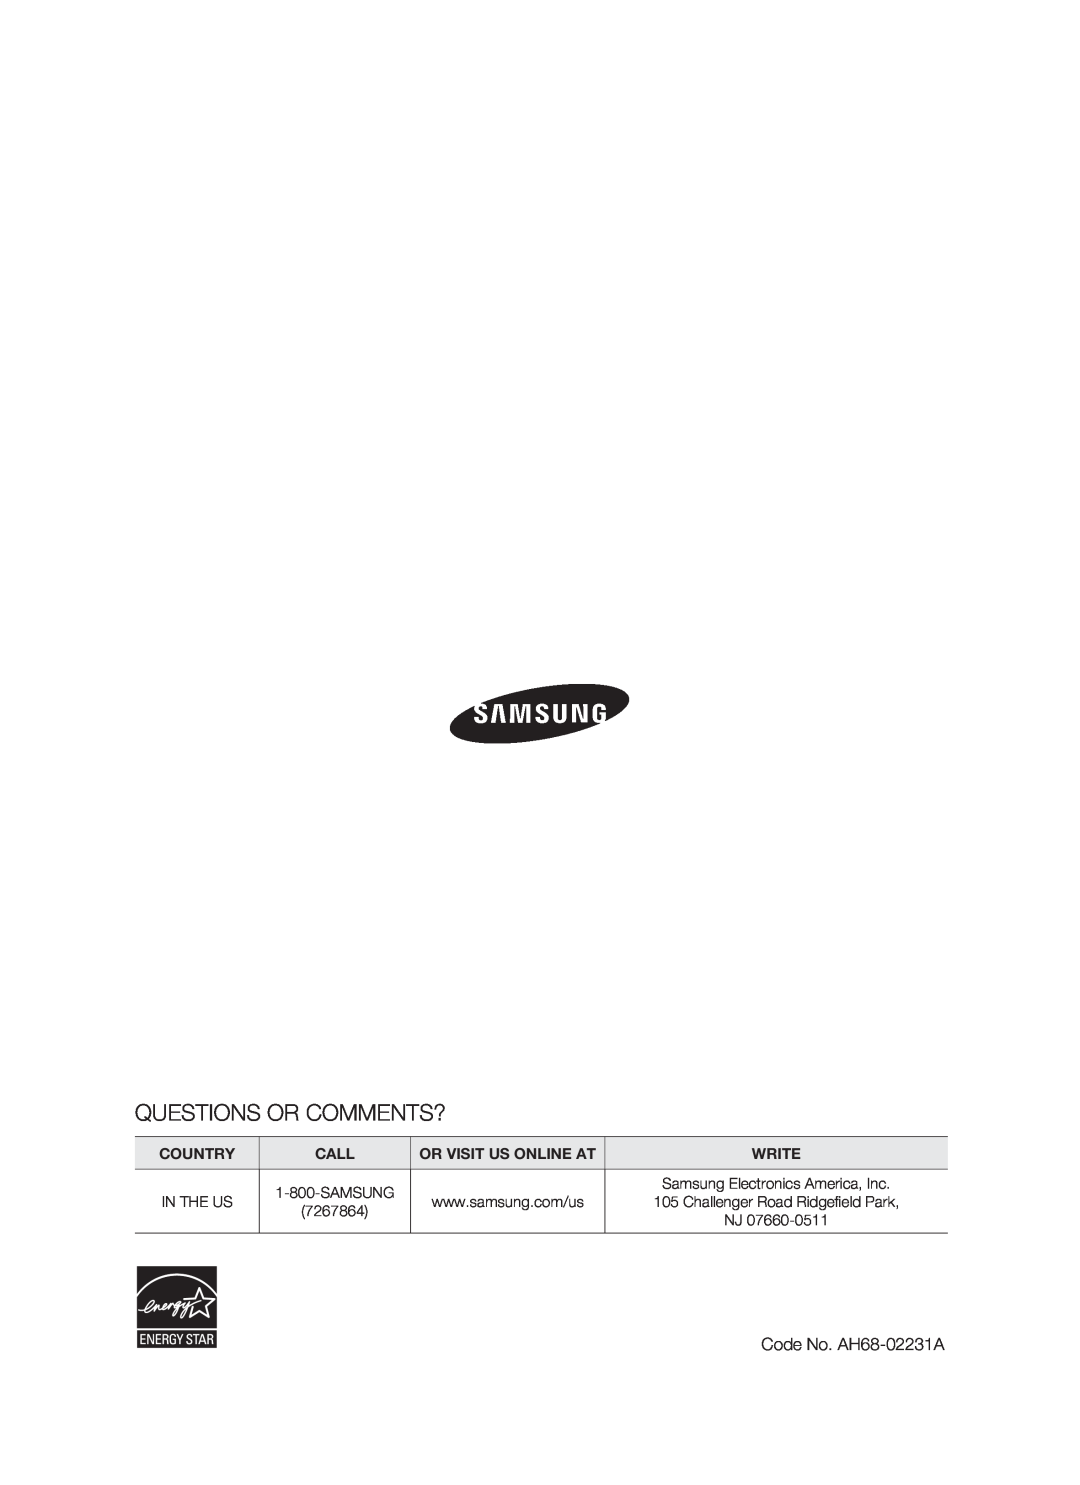 Samsung HT-BD3252A, AH68-02231A Questions Or Comments?, Country, Call, Or Visit Us Online At, Write, Samsung, In The Us 